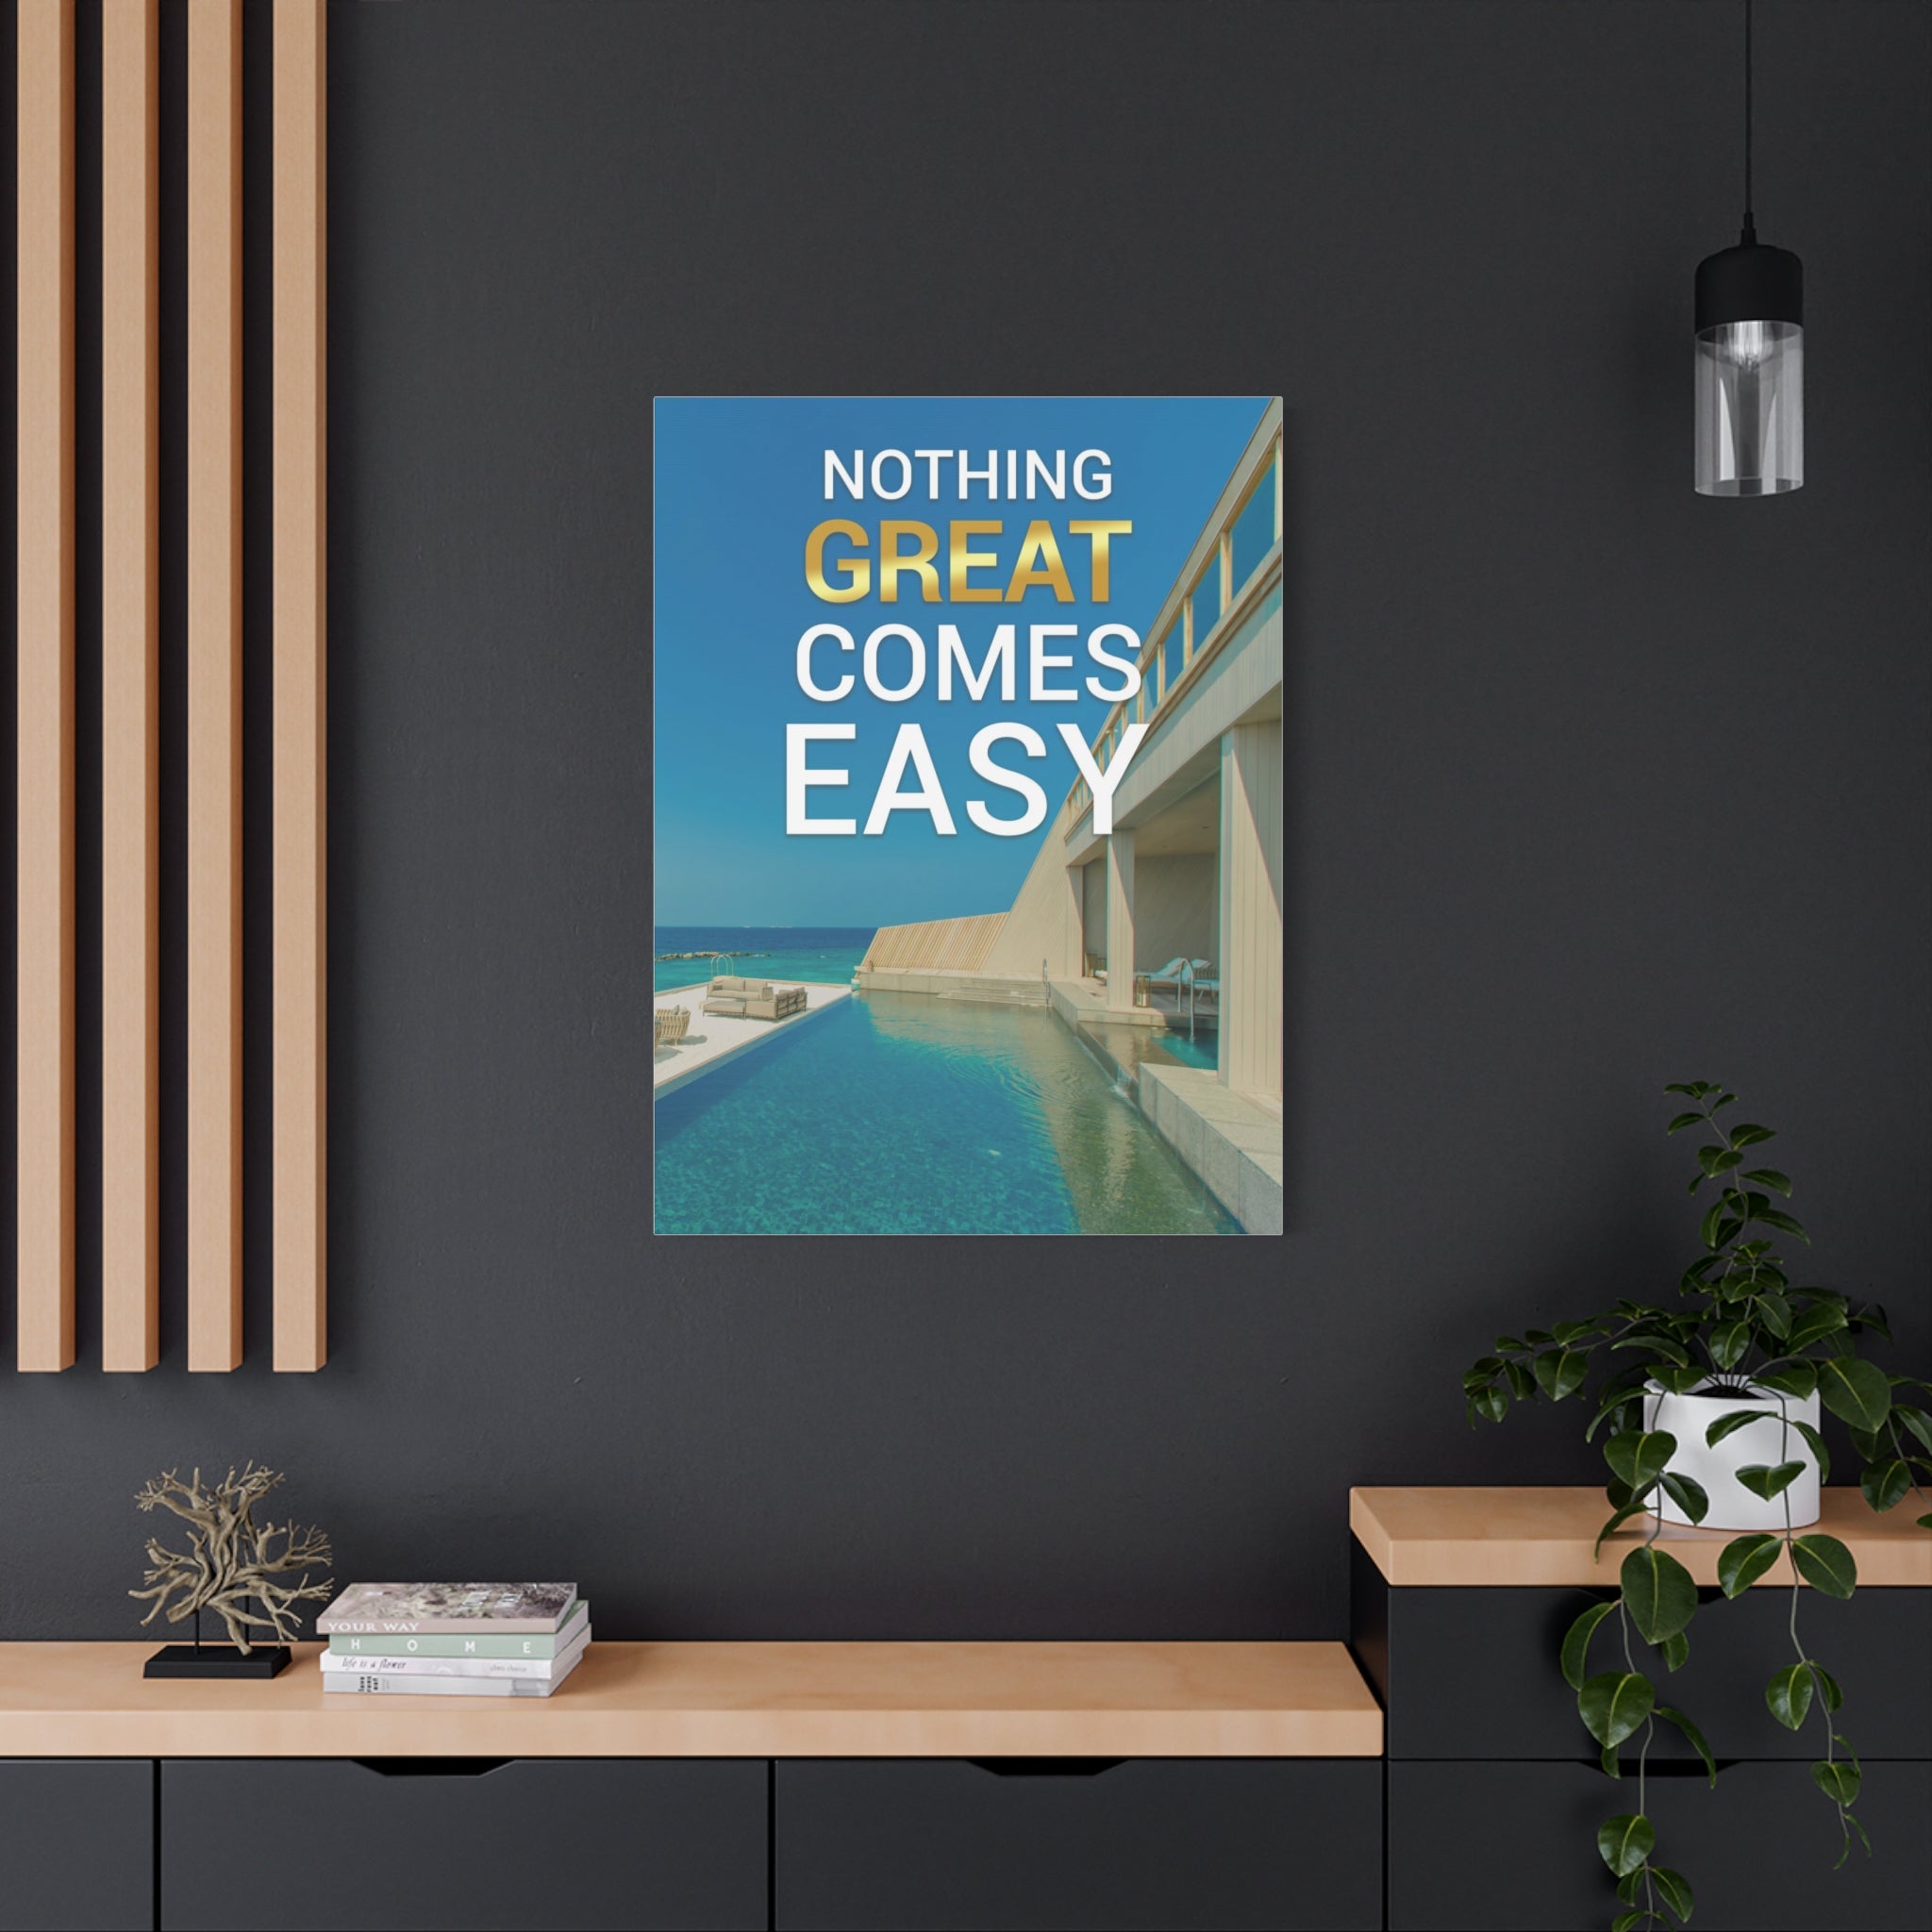 Nothing Great Comes Easy Wall Art additional image 1